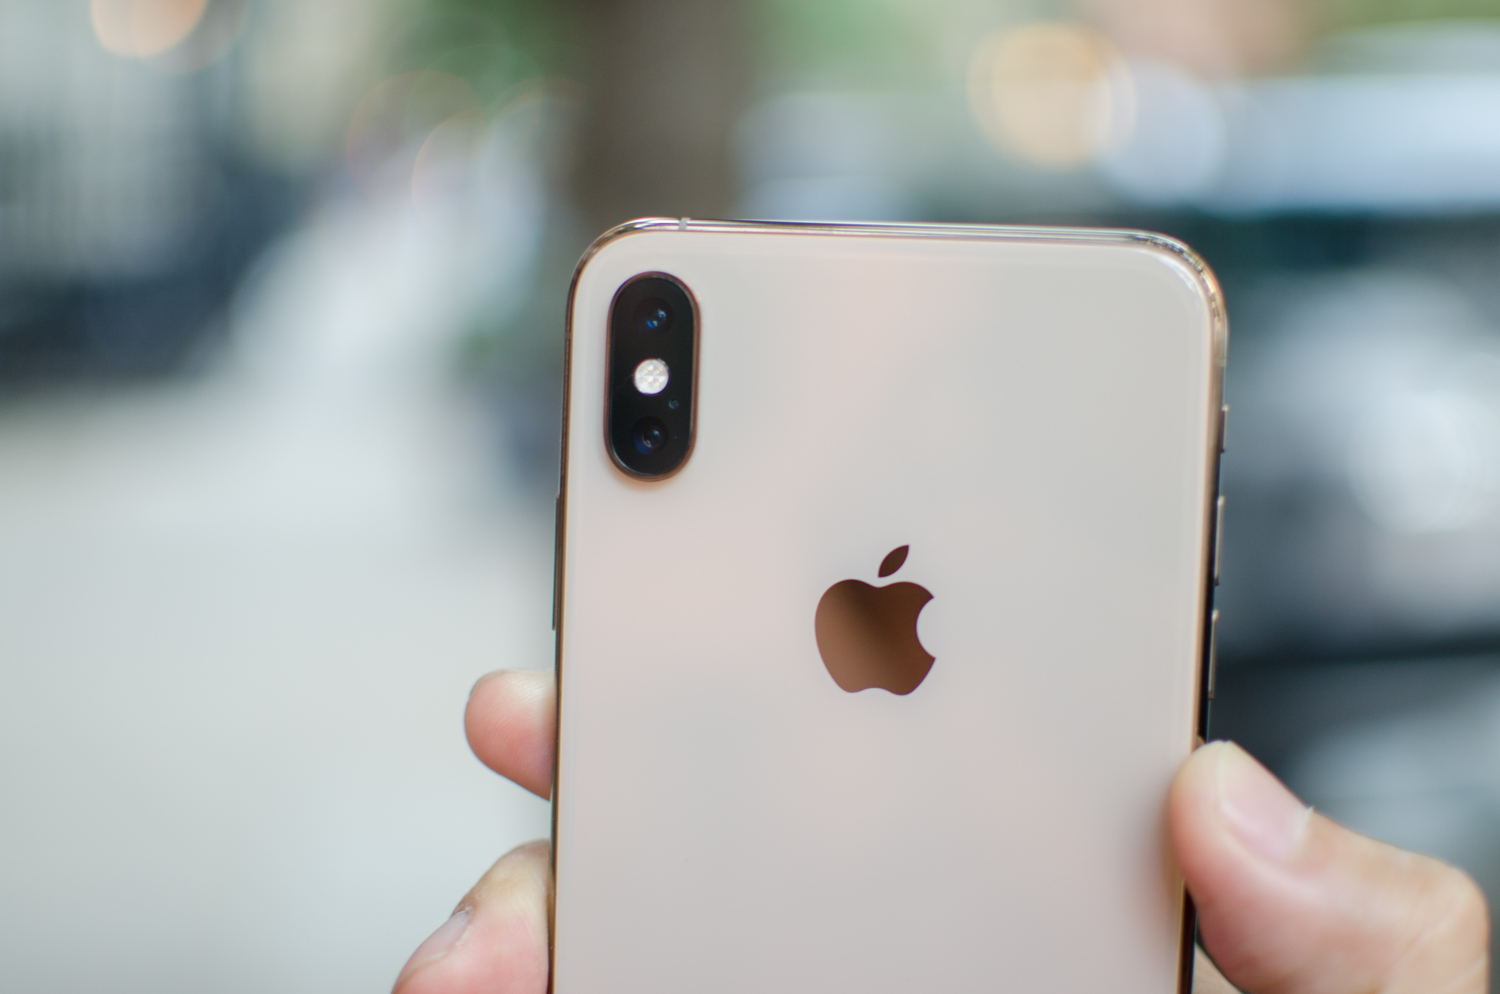 Apple's iPhone XS Max is selling a lot better than XS, report